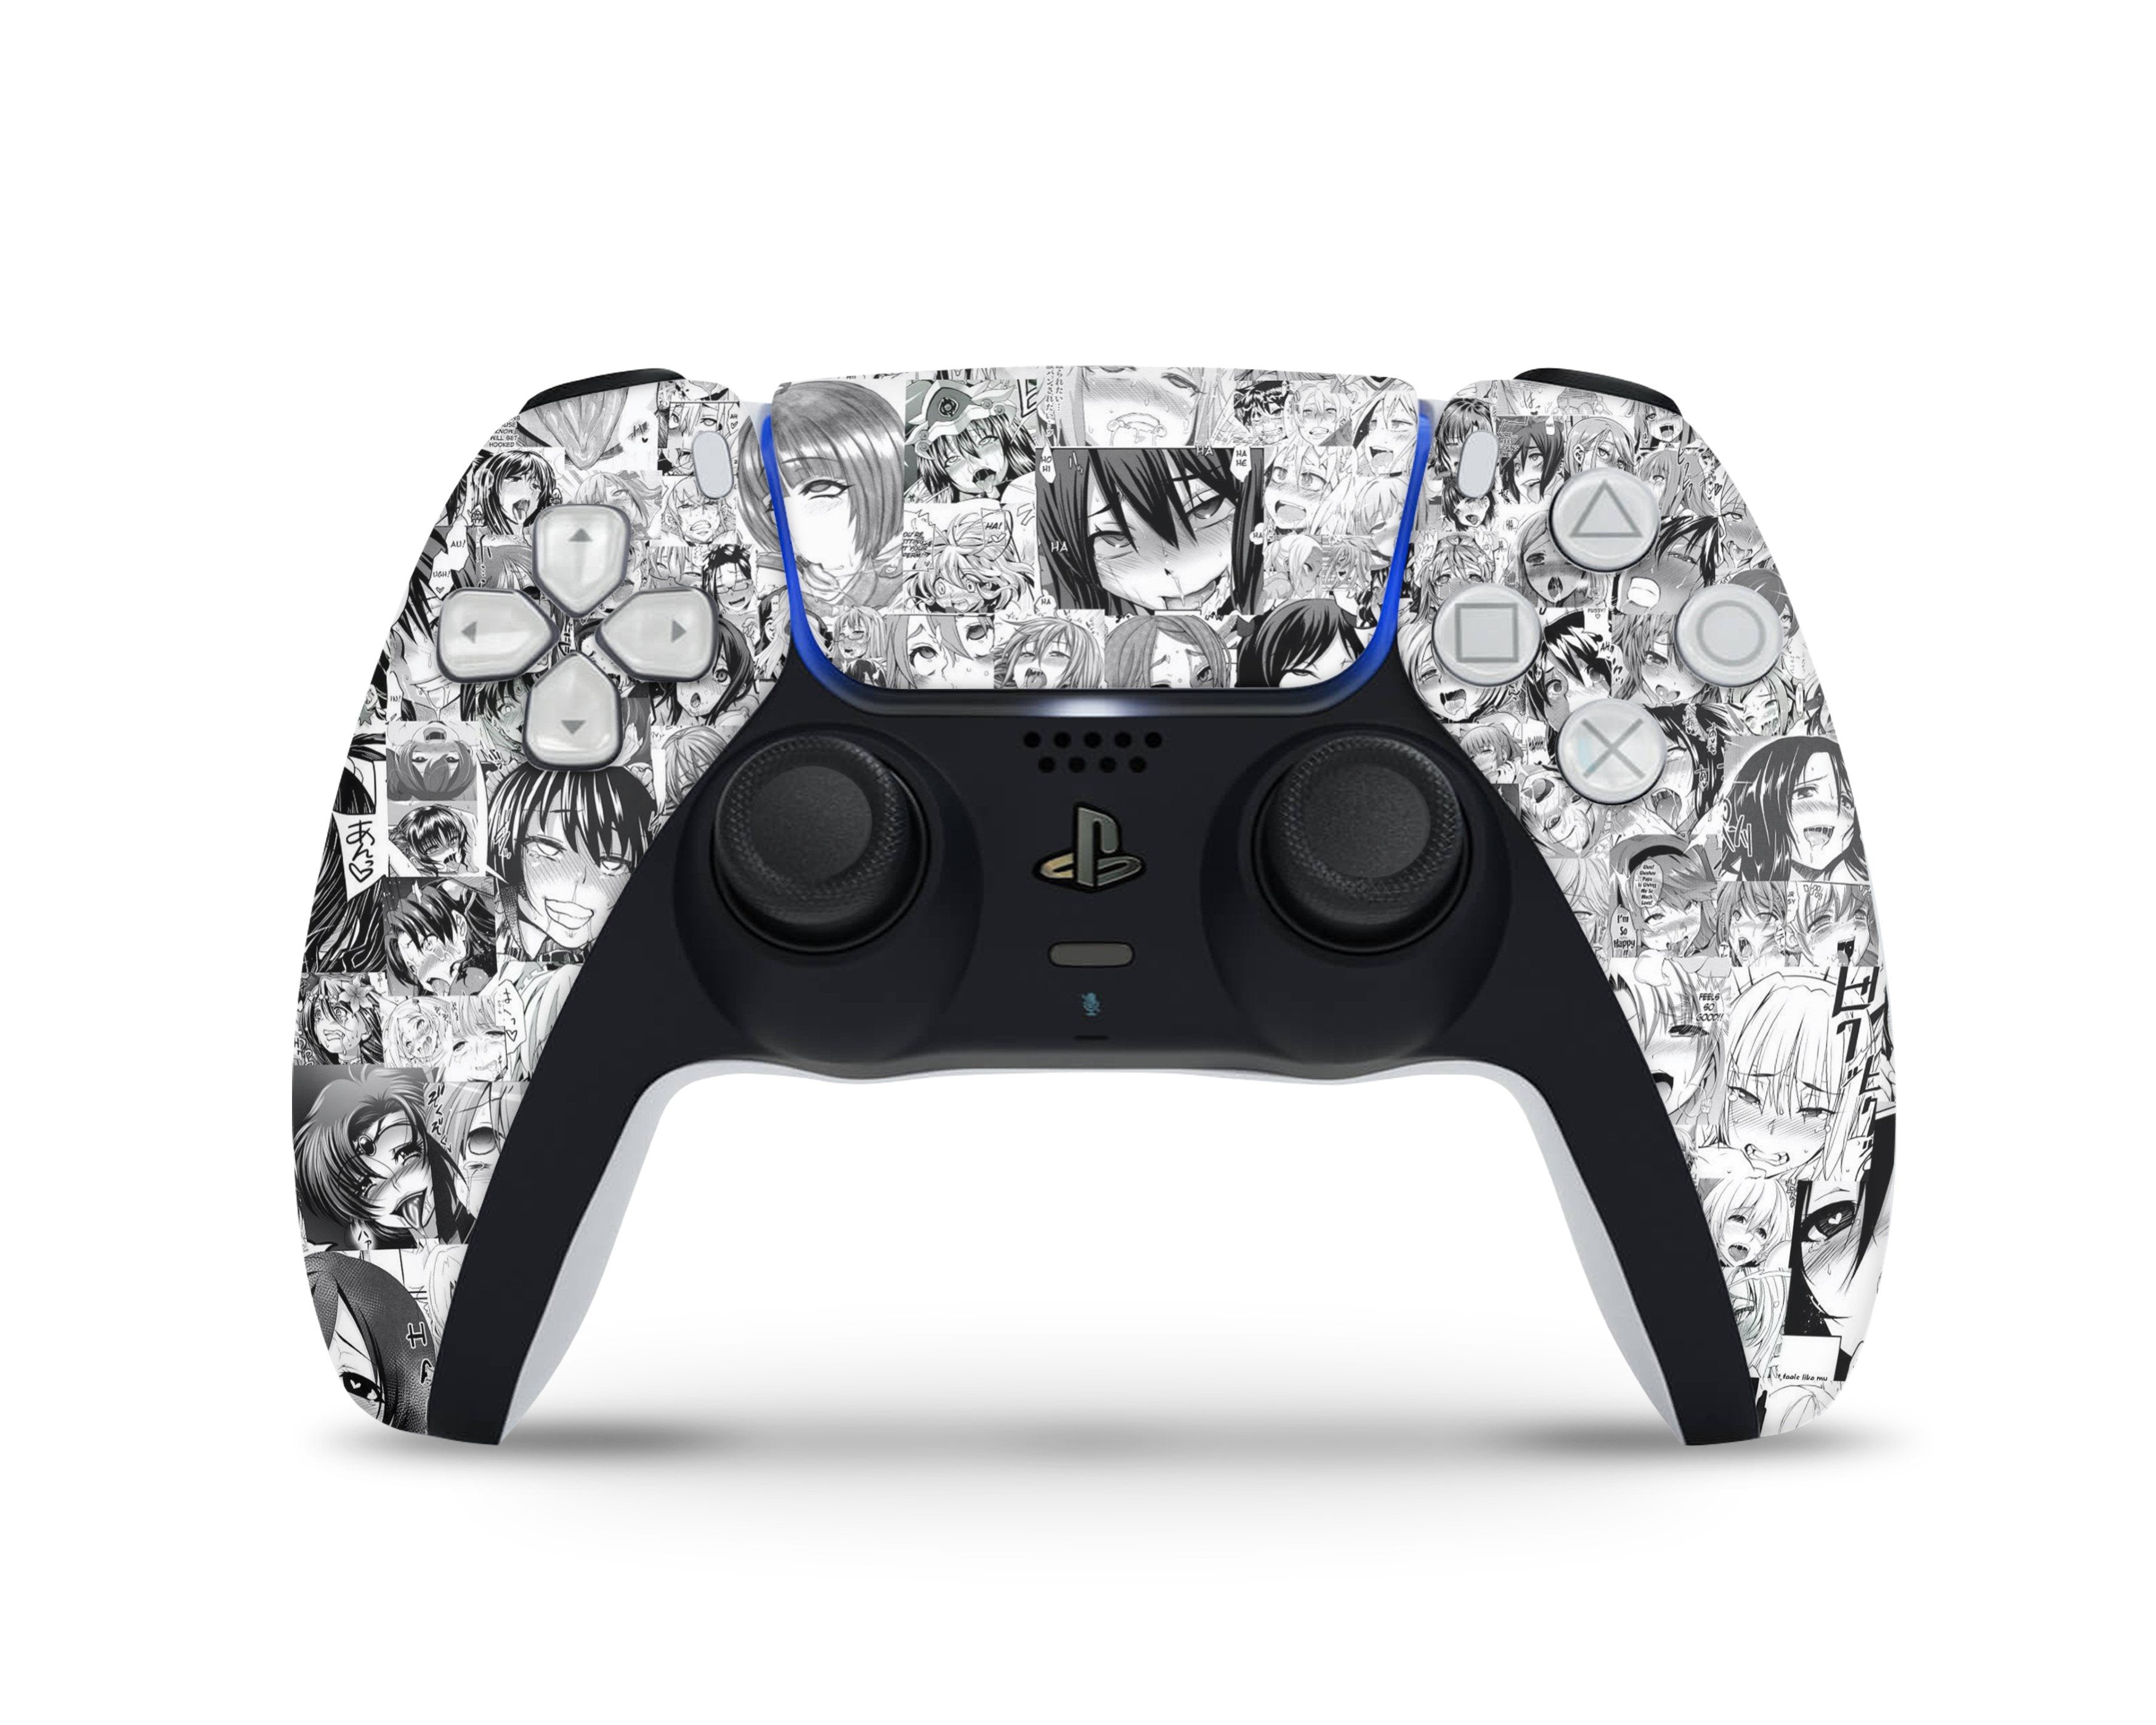 PS5 Skin Digital Edition Anime Console and Controller Cover Skins Mecha Fan  Art | eBay